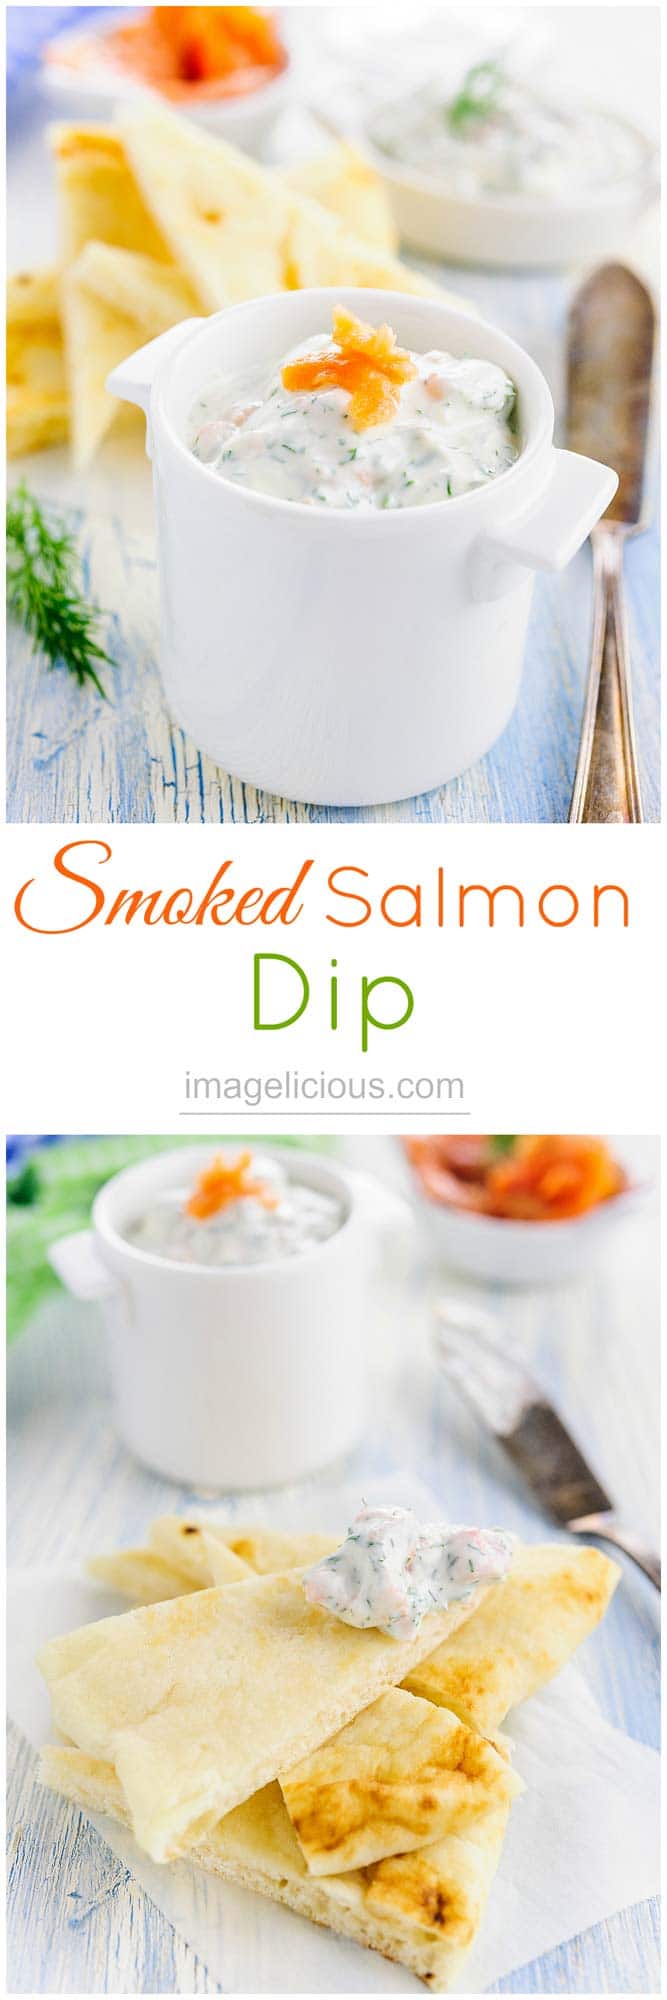 This light Smoked Salmon Dip is delicious and healthy, full of ricotta, greek yogurt and herbs. Perfect appetizer to satisfy salty craving | Imagelicious